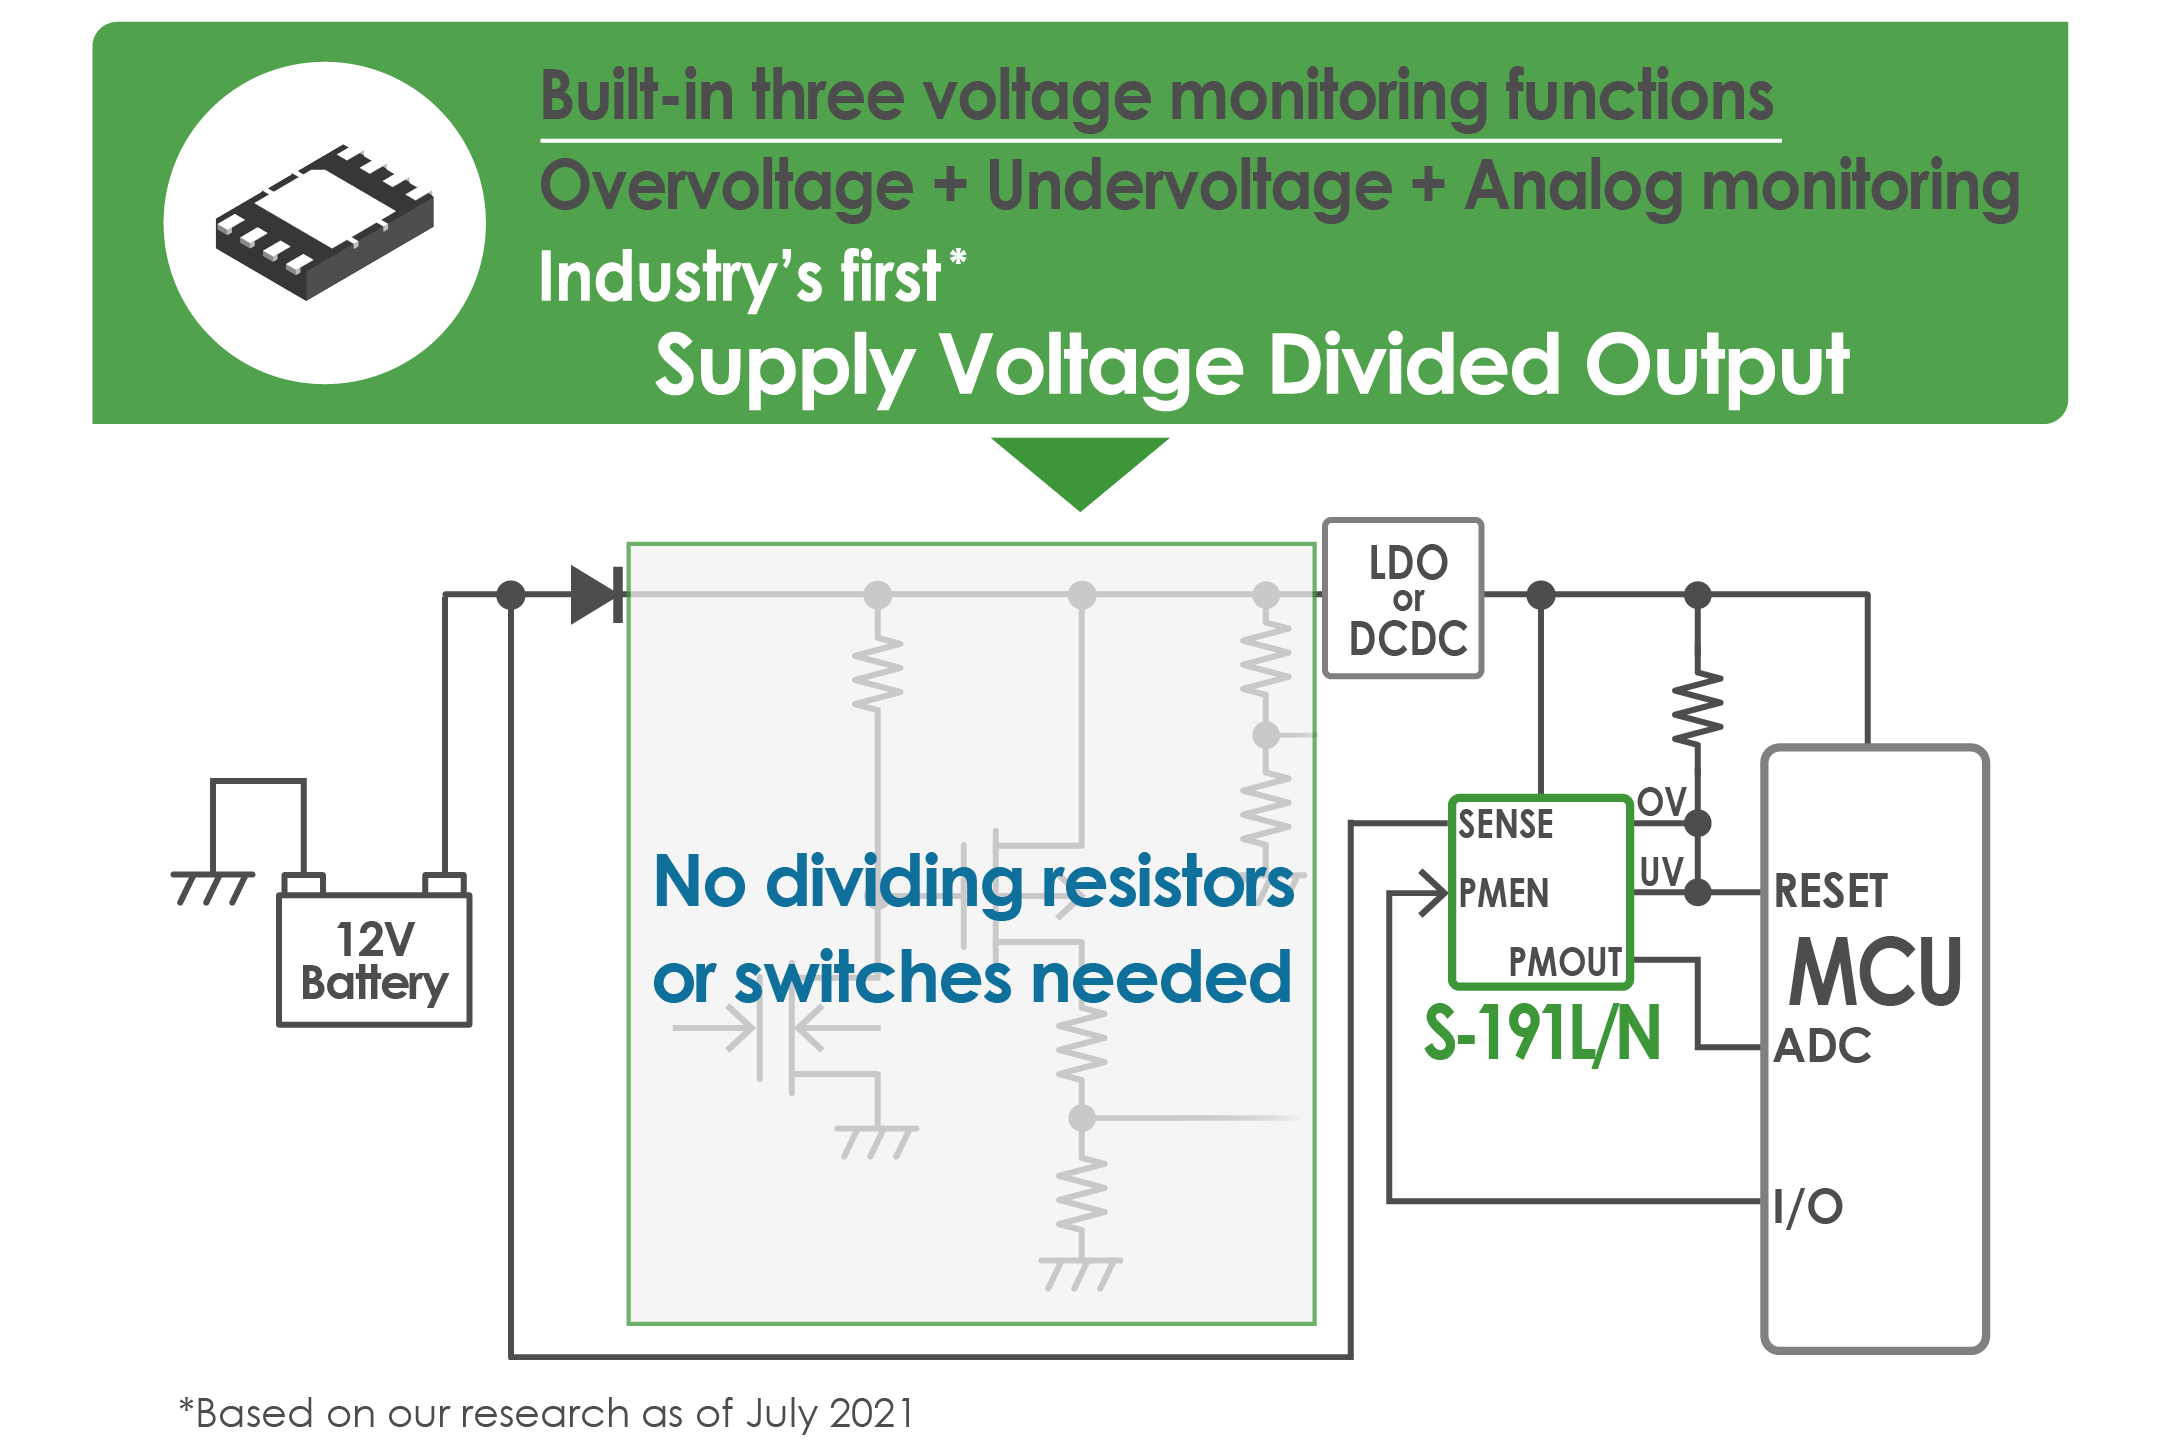 S-191L/N features; Built-in three voltage monitoring functions. Industry's first supply voltage divided output